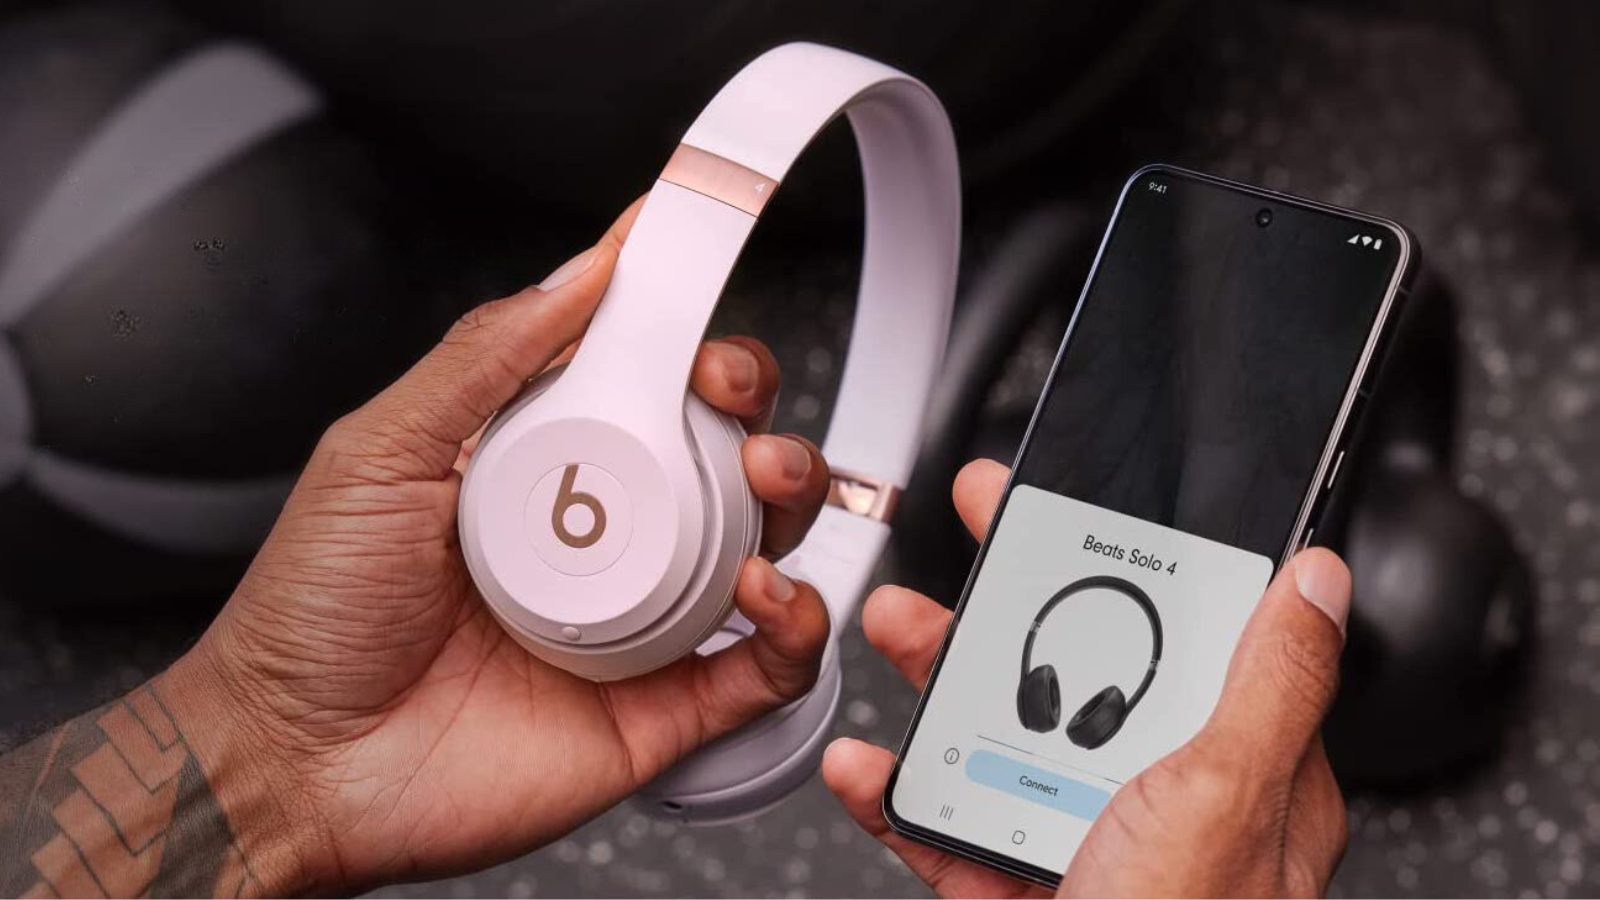 person holding Beats Solo 4 headphones and phone